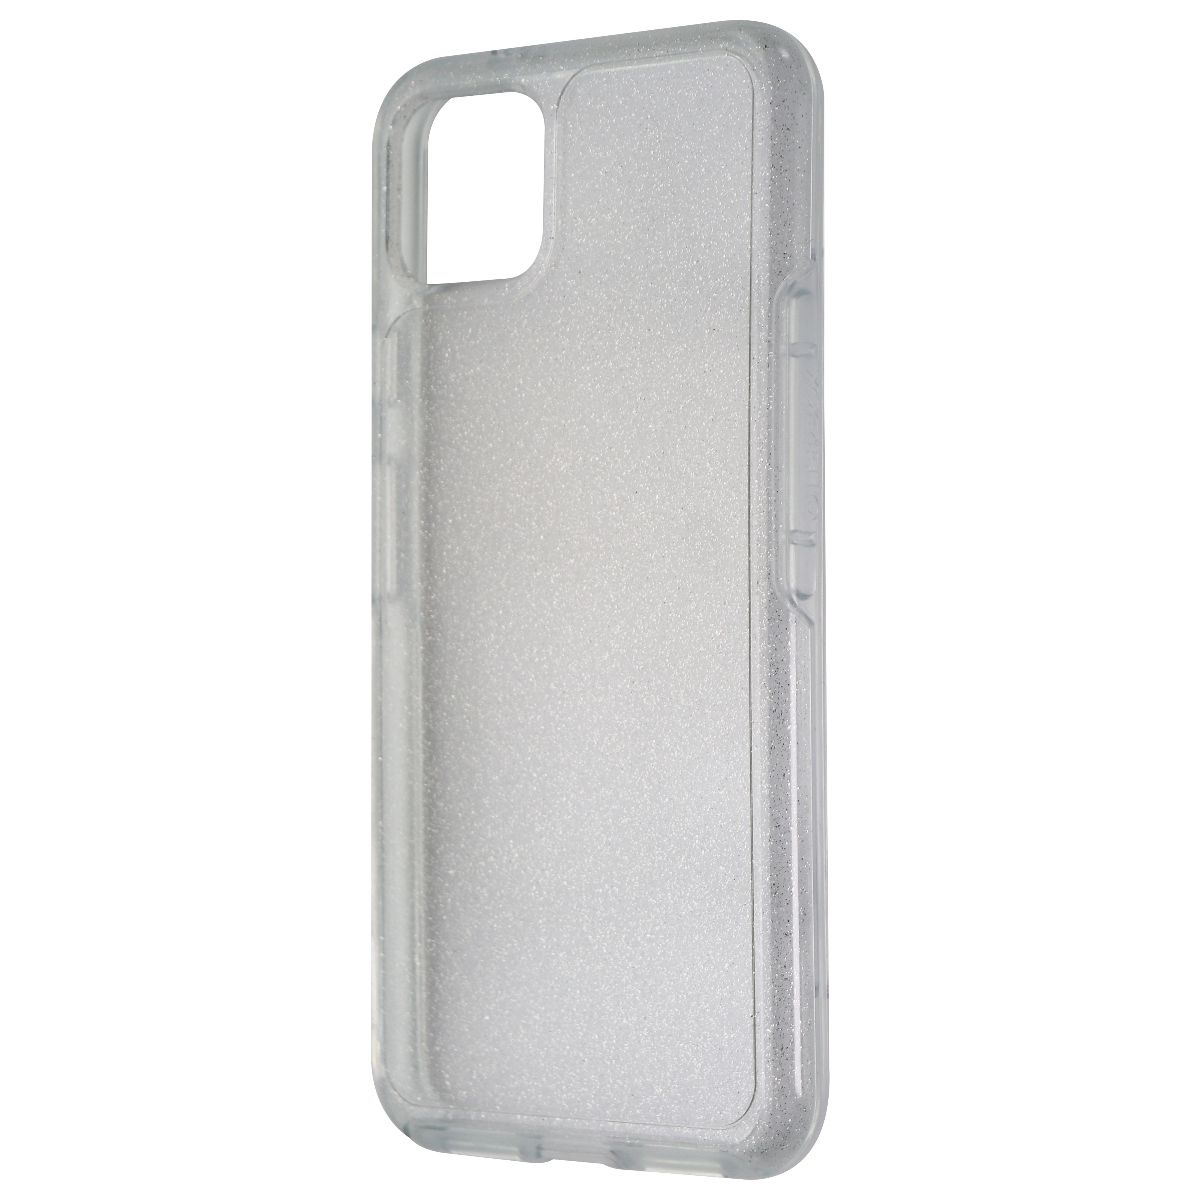 OtterBox Symmetry Series Case for Google Pixel 4 XL Smartphone - Stardust/Clear (Used) - image 1 of 2